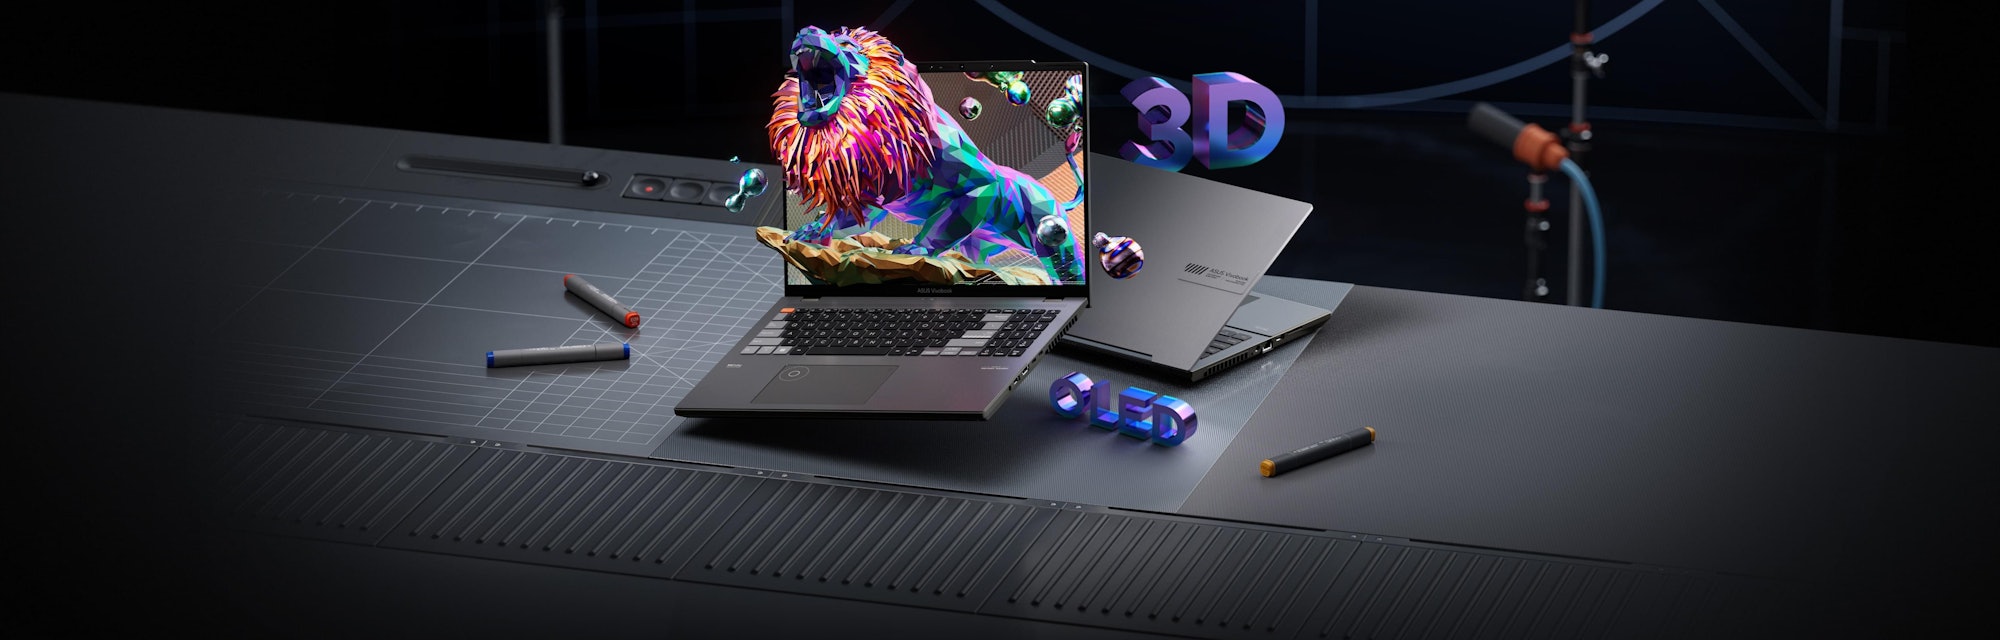 Asus ProArt Studiobook and Vivobook Pro laptops with glasses-free 3D displays